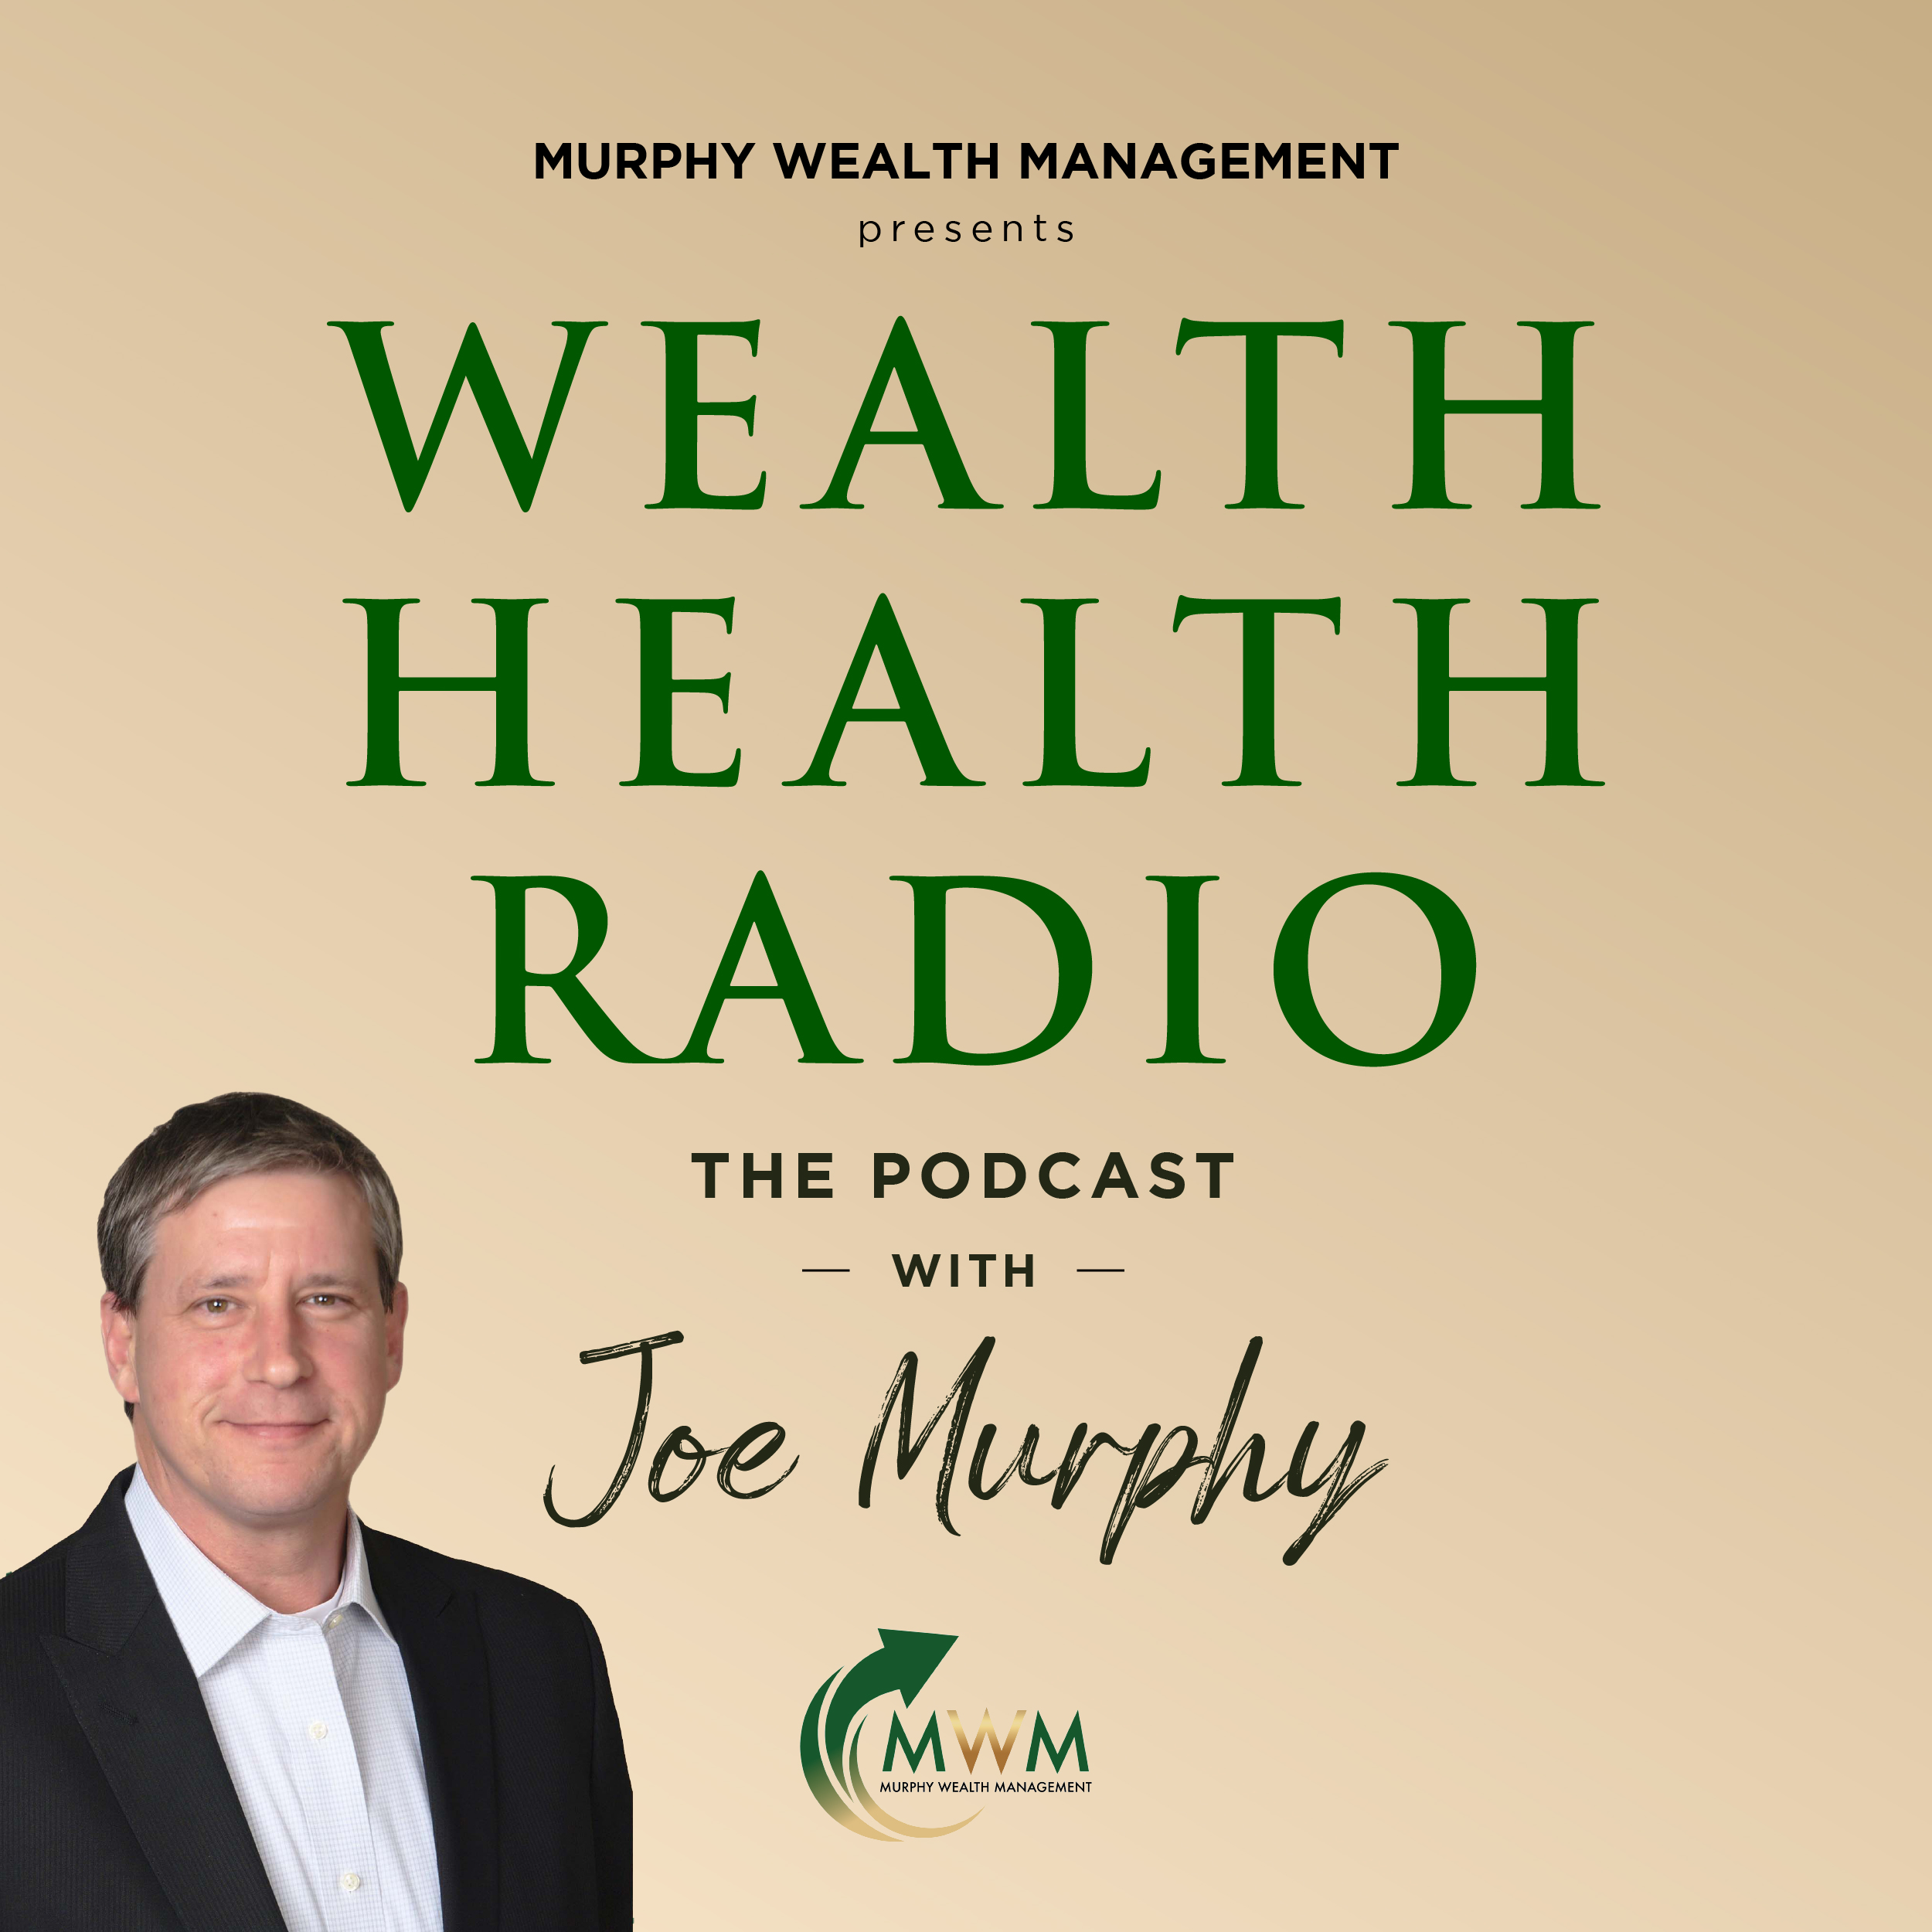 Wealth Health Radio Joe goes over some key ages to consider in the retirement planning process.